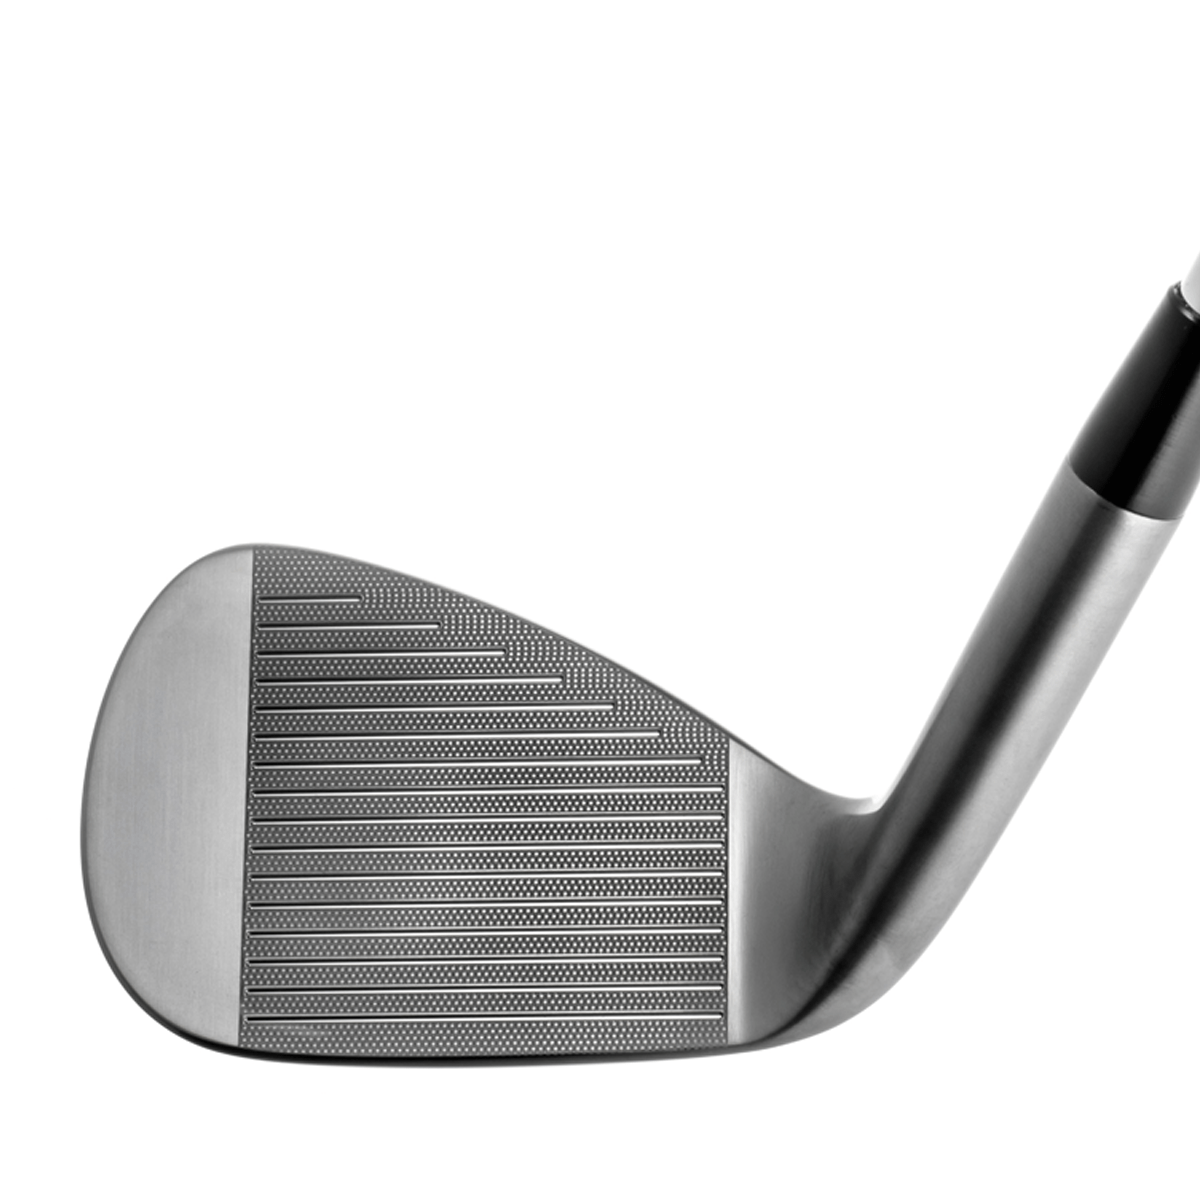 PROTOCONCEPT Golf, Forged Wedge - 17